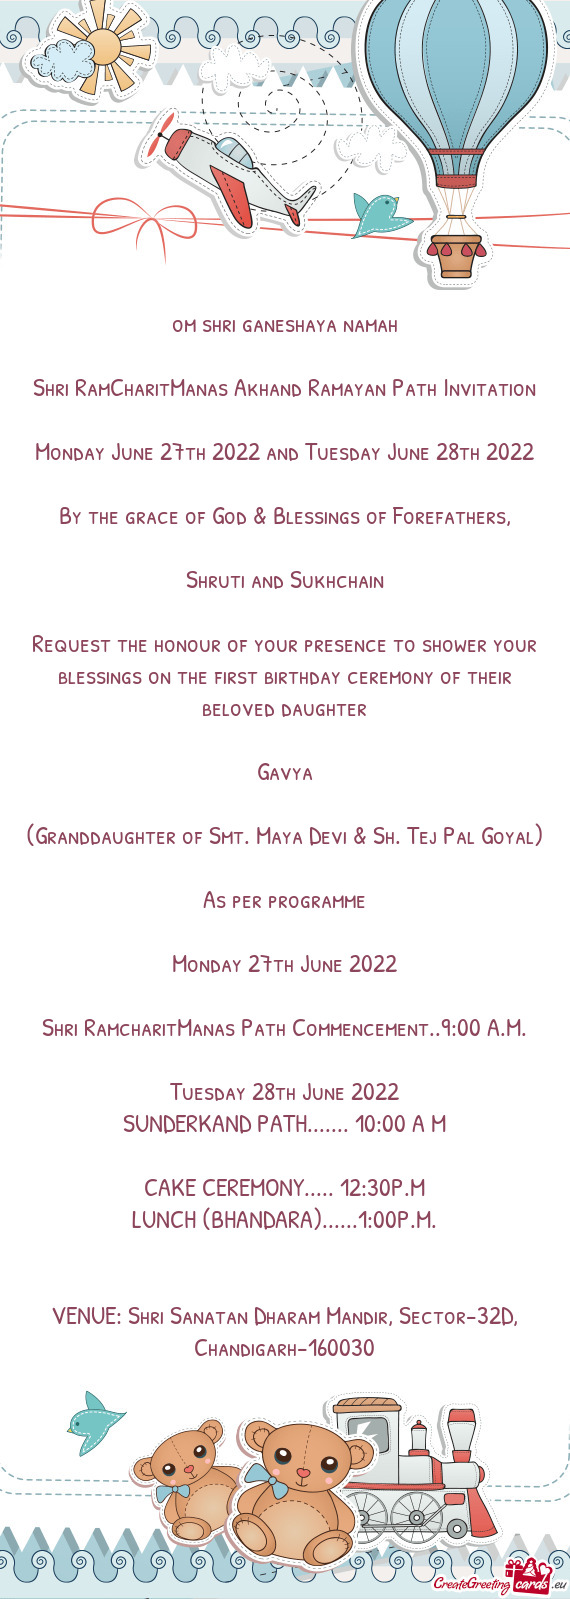 Request the honour of your presence to shower your blessings on the first birthday ceremony of their